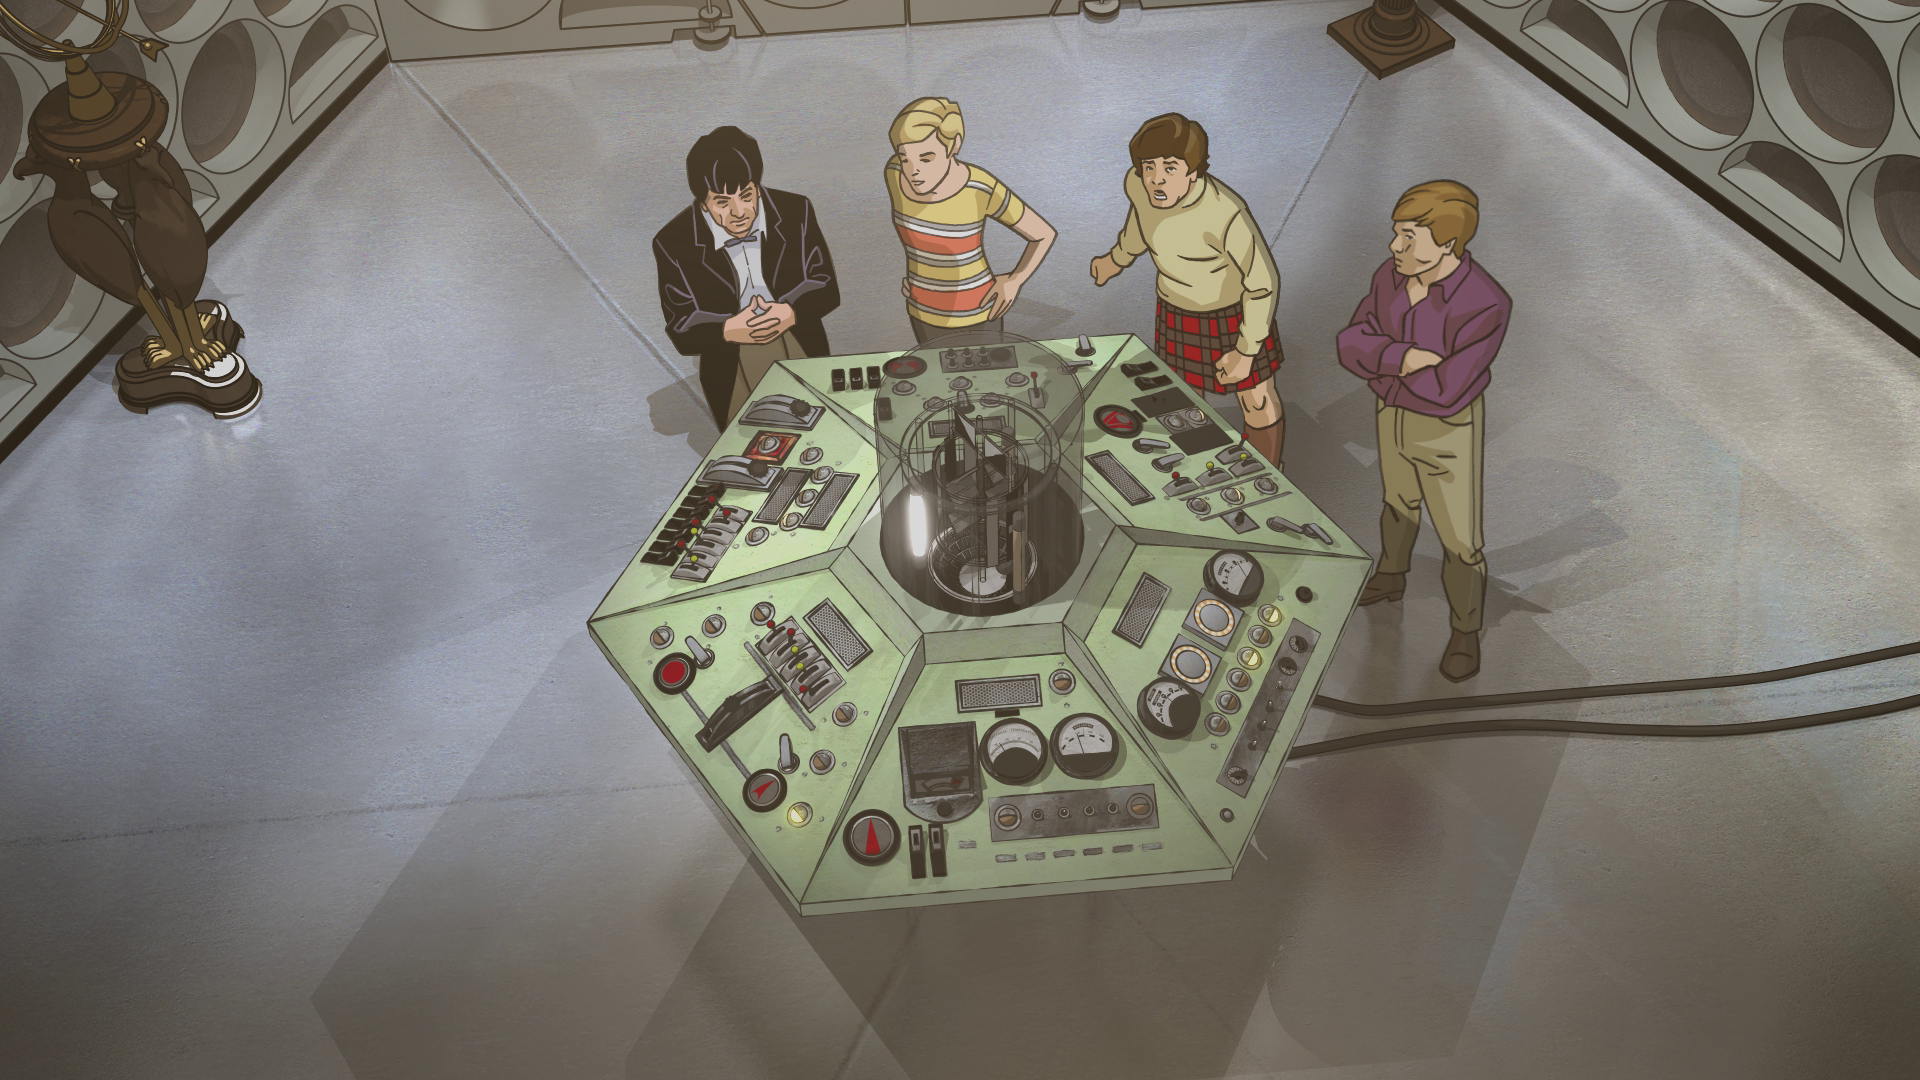 The crew in the Tardis in the new animation